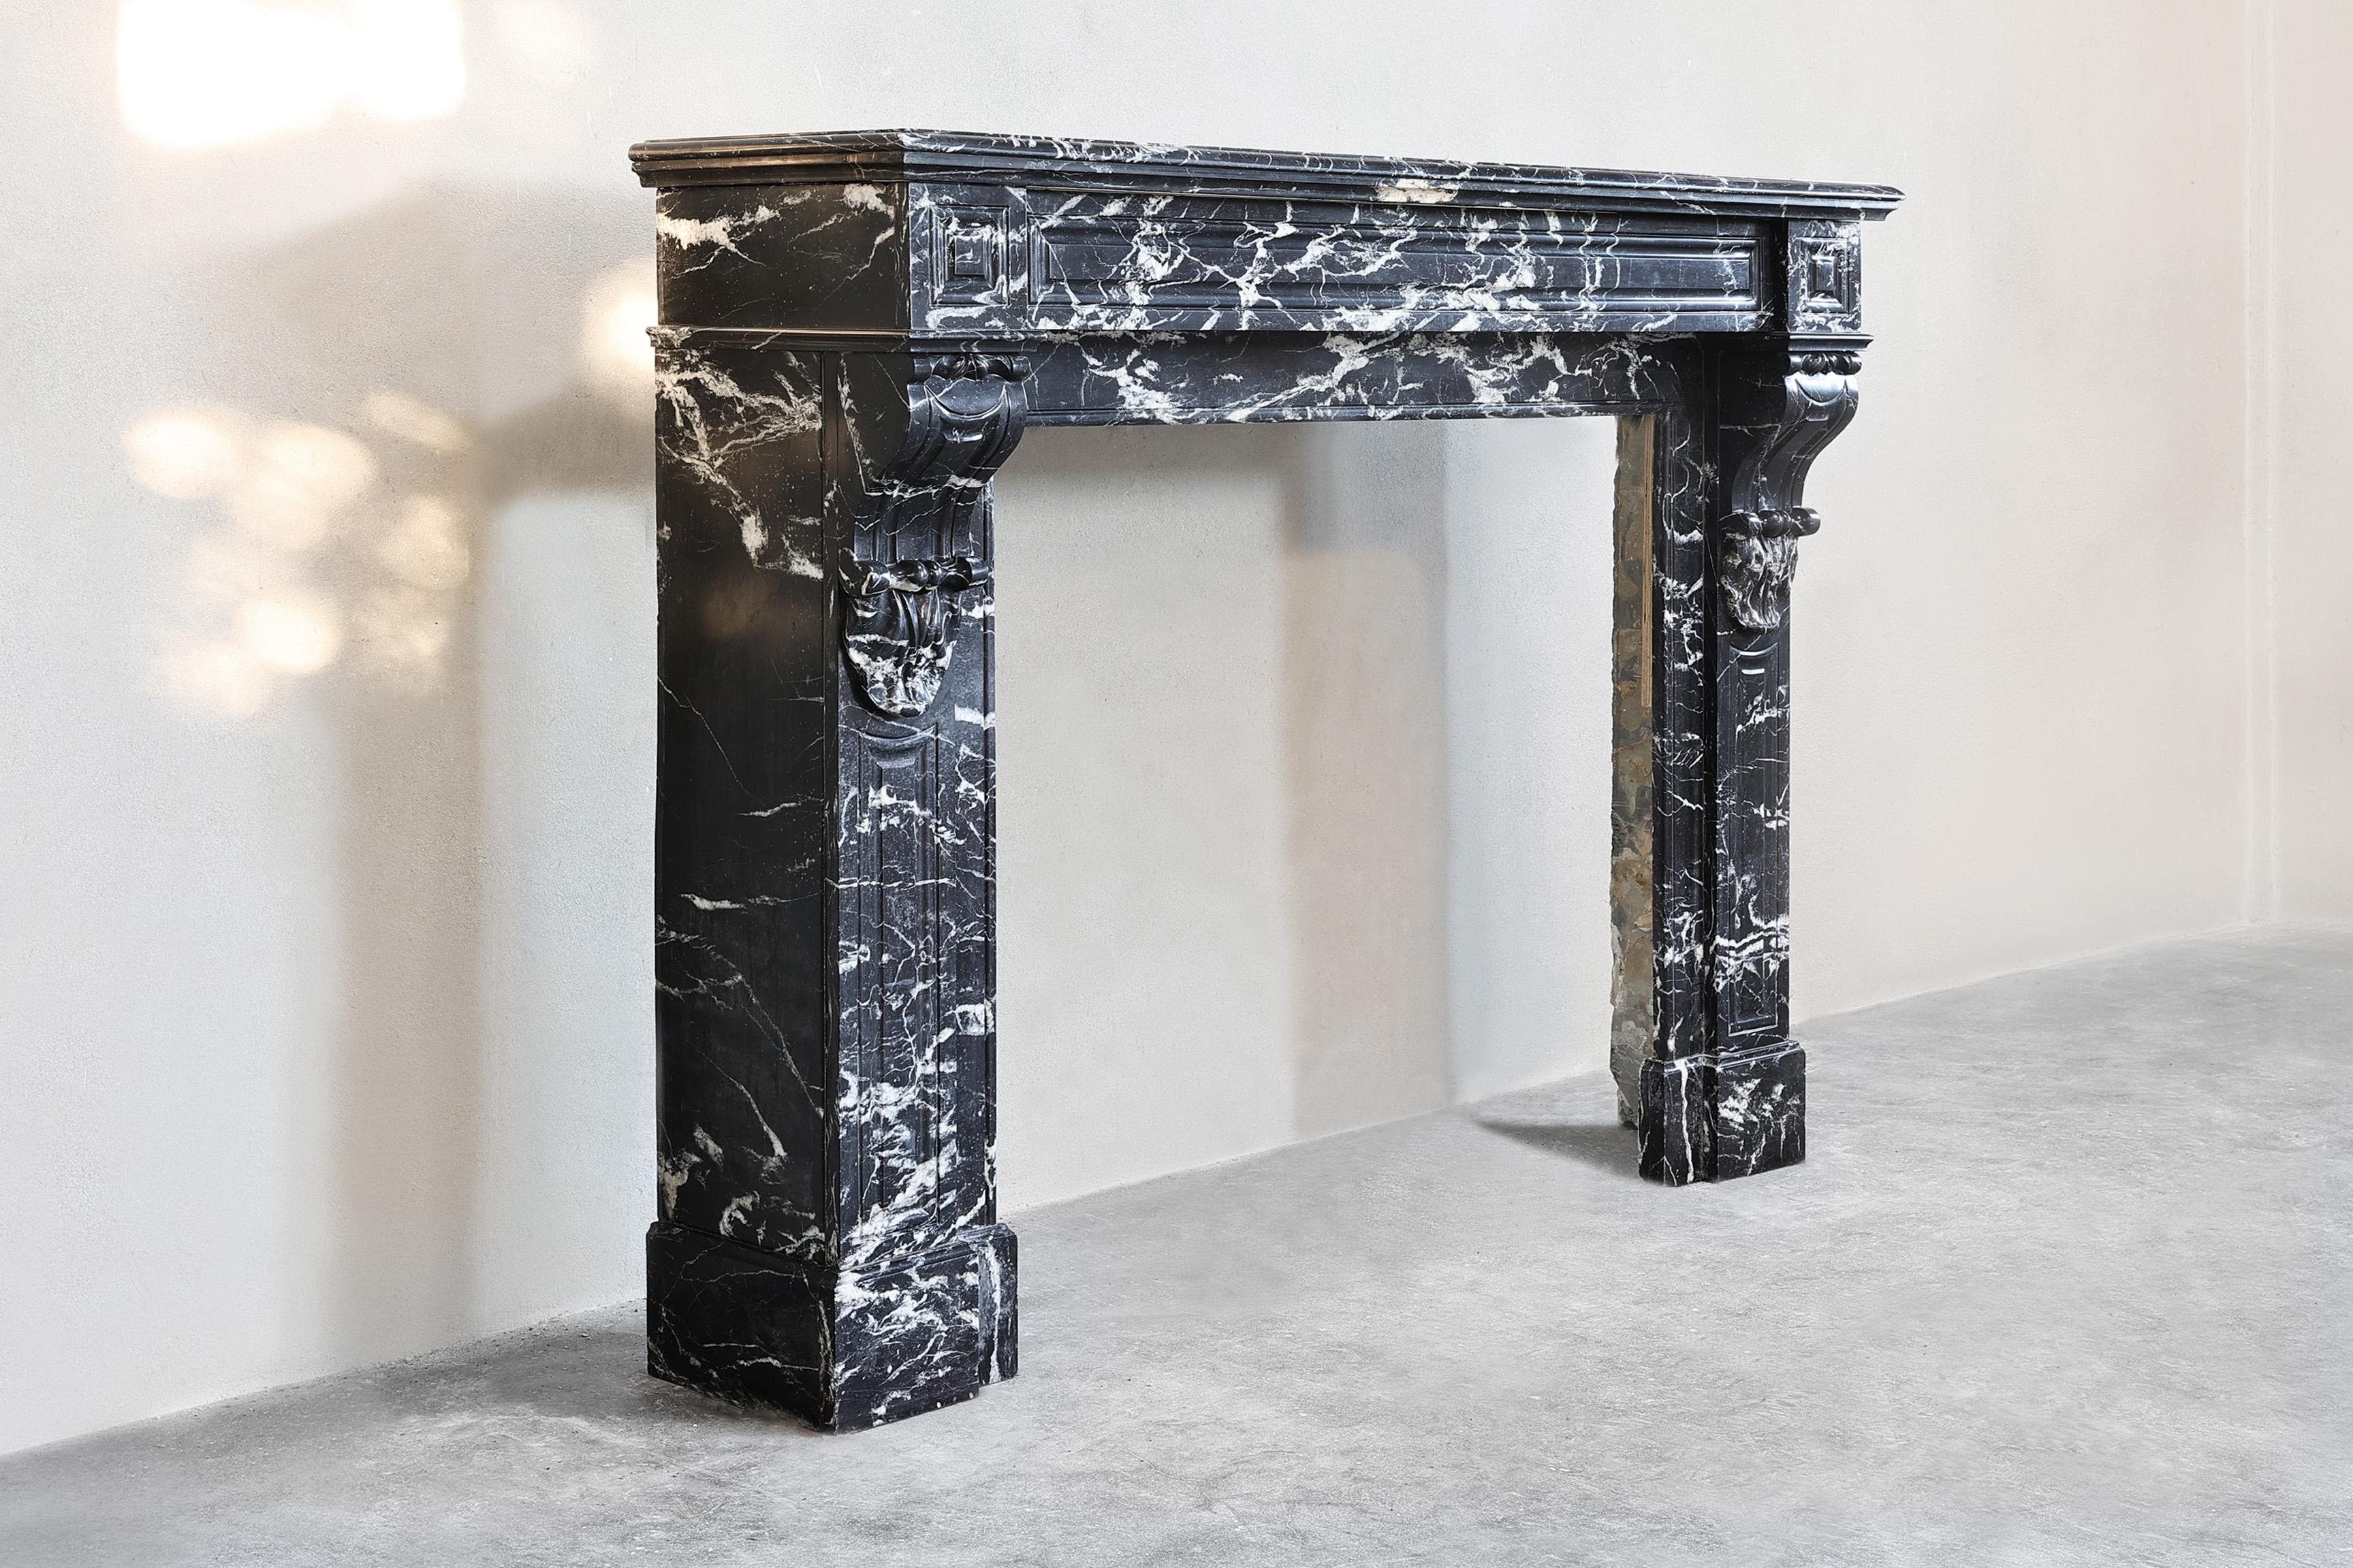 Beautiful antique marble mantelpiece made of Nero Marquina marble from the 19th century. This black marble with white veins gives a chic and timeless look. This mantle in the style of Louis XVI has a sleek shape and has fluting on the legs, but few